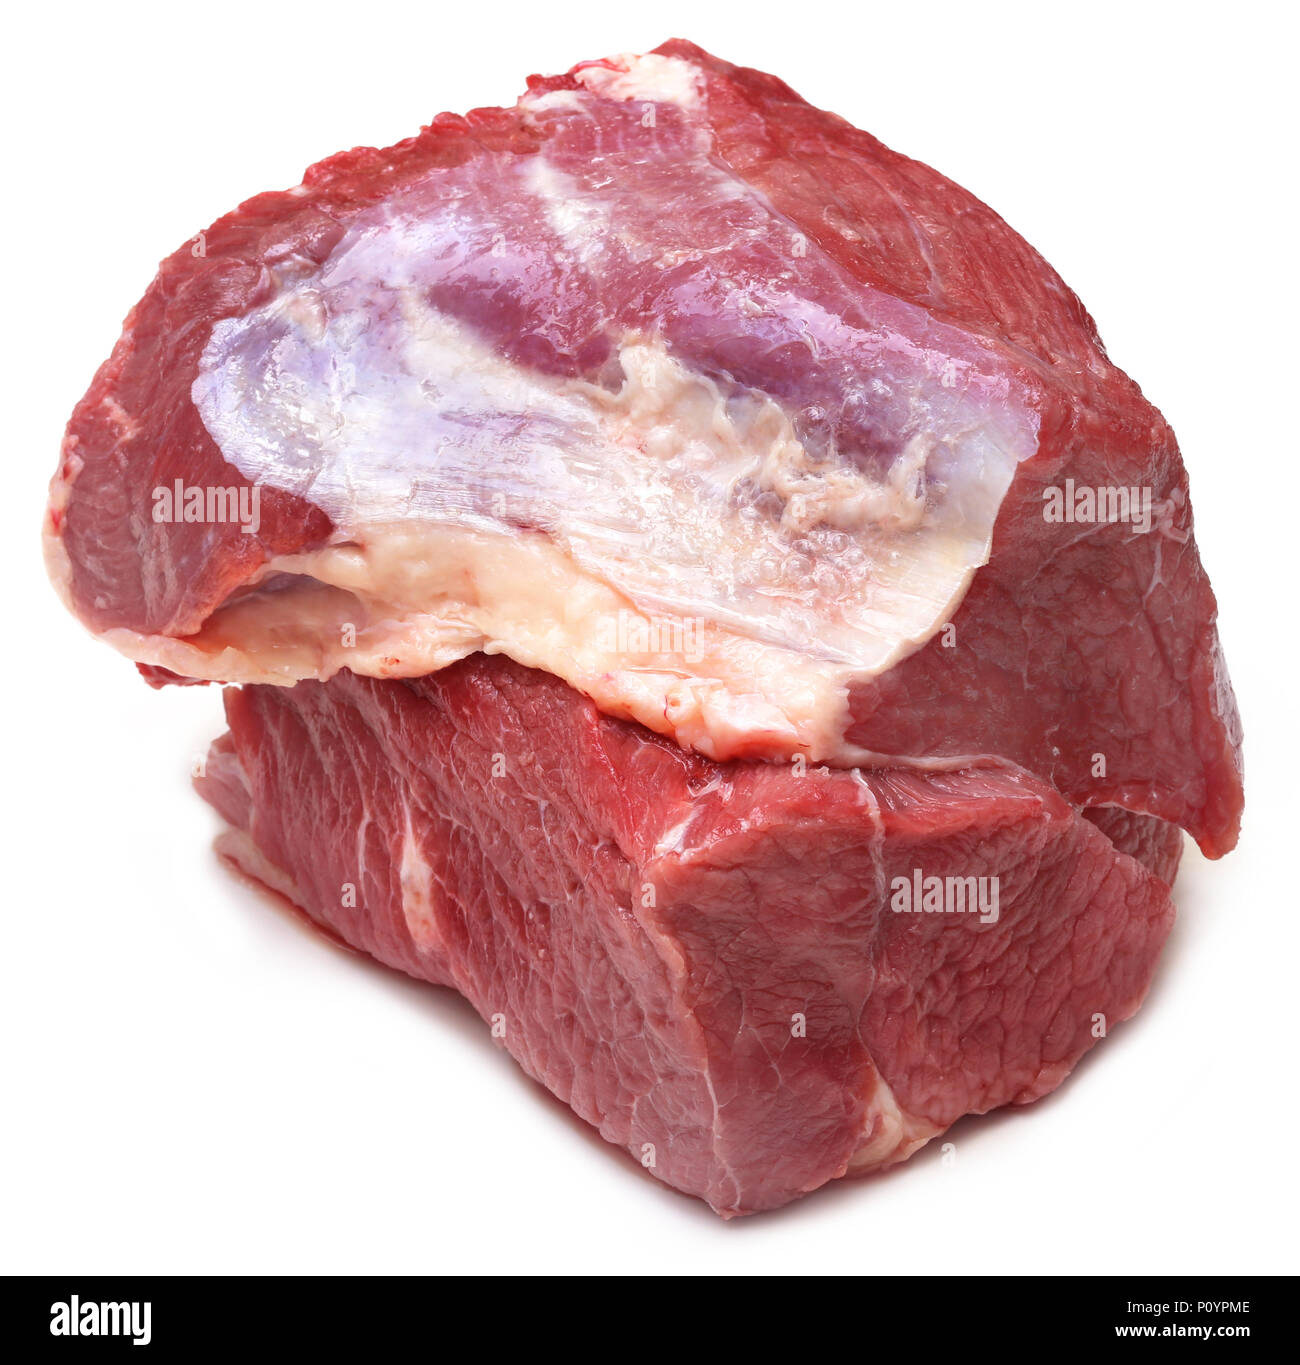 Chunk of beef over white background Stock Photo